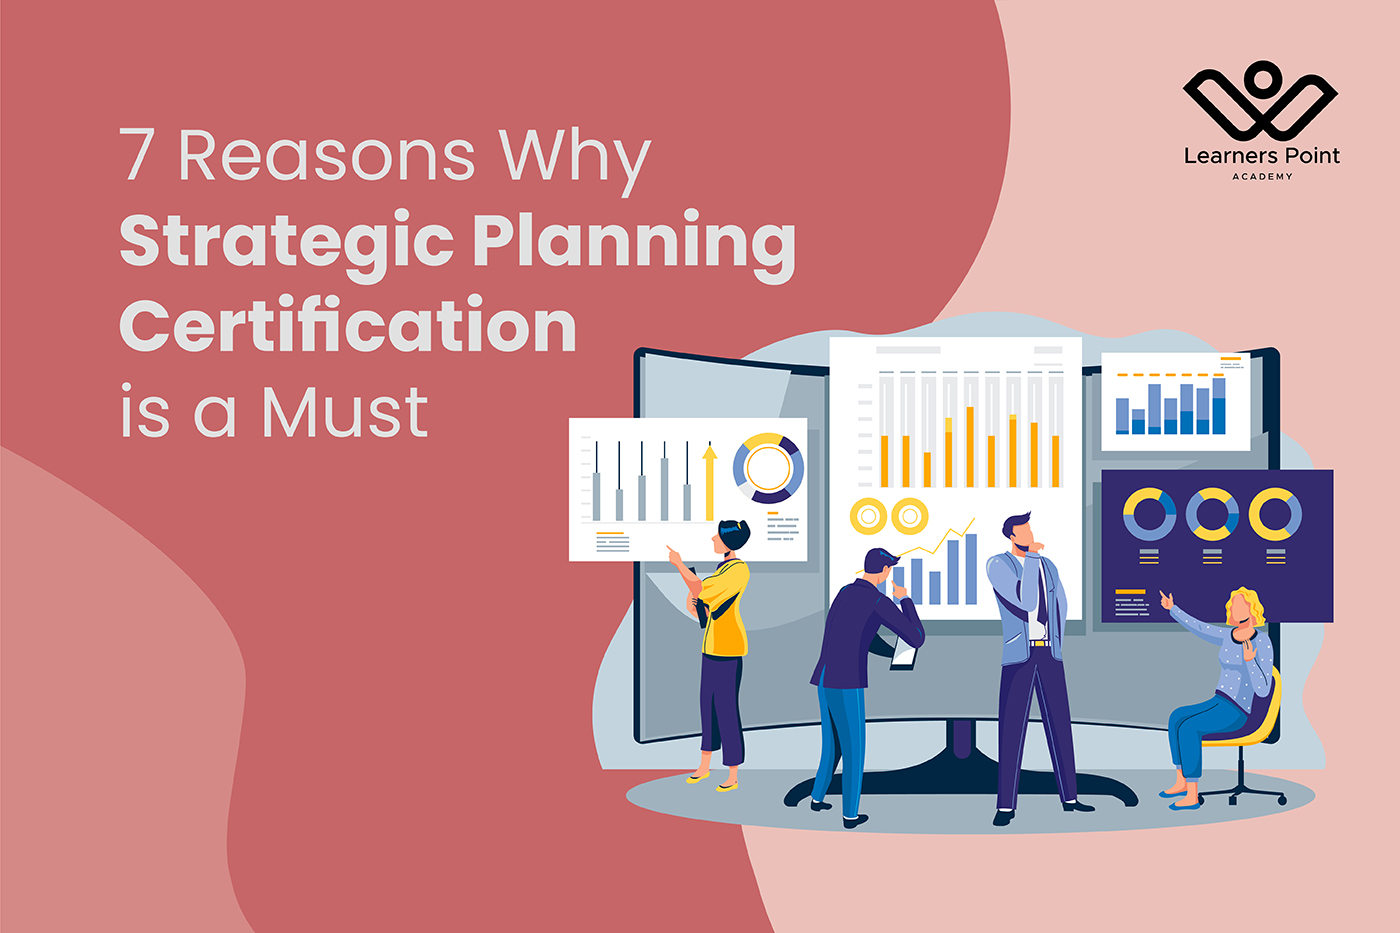 7 Reasons Why Strategic Planning Certification is a Must